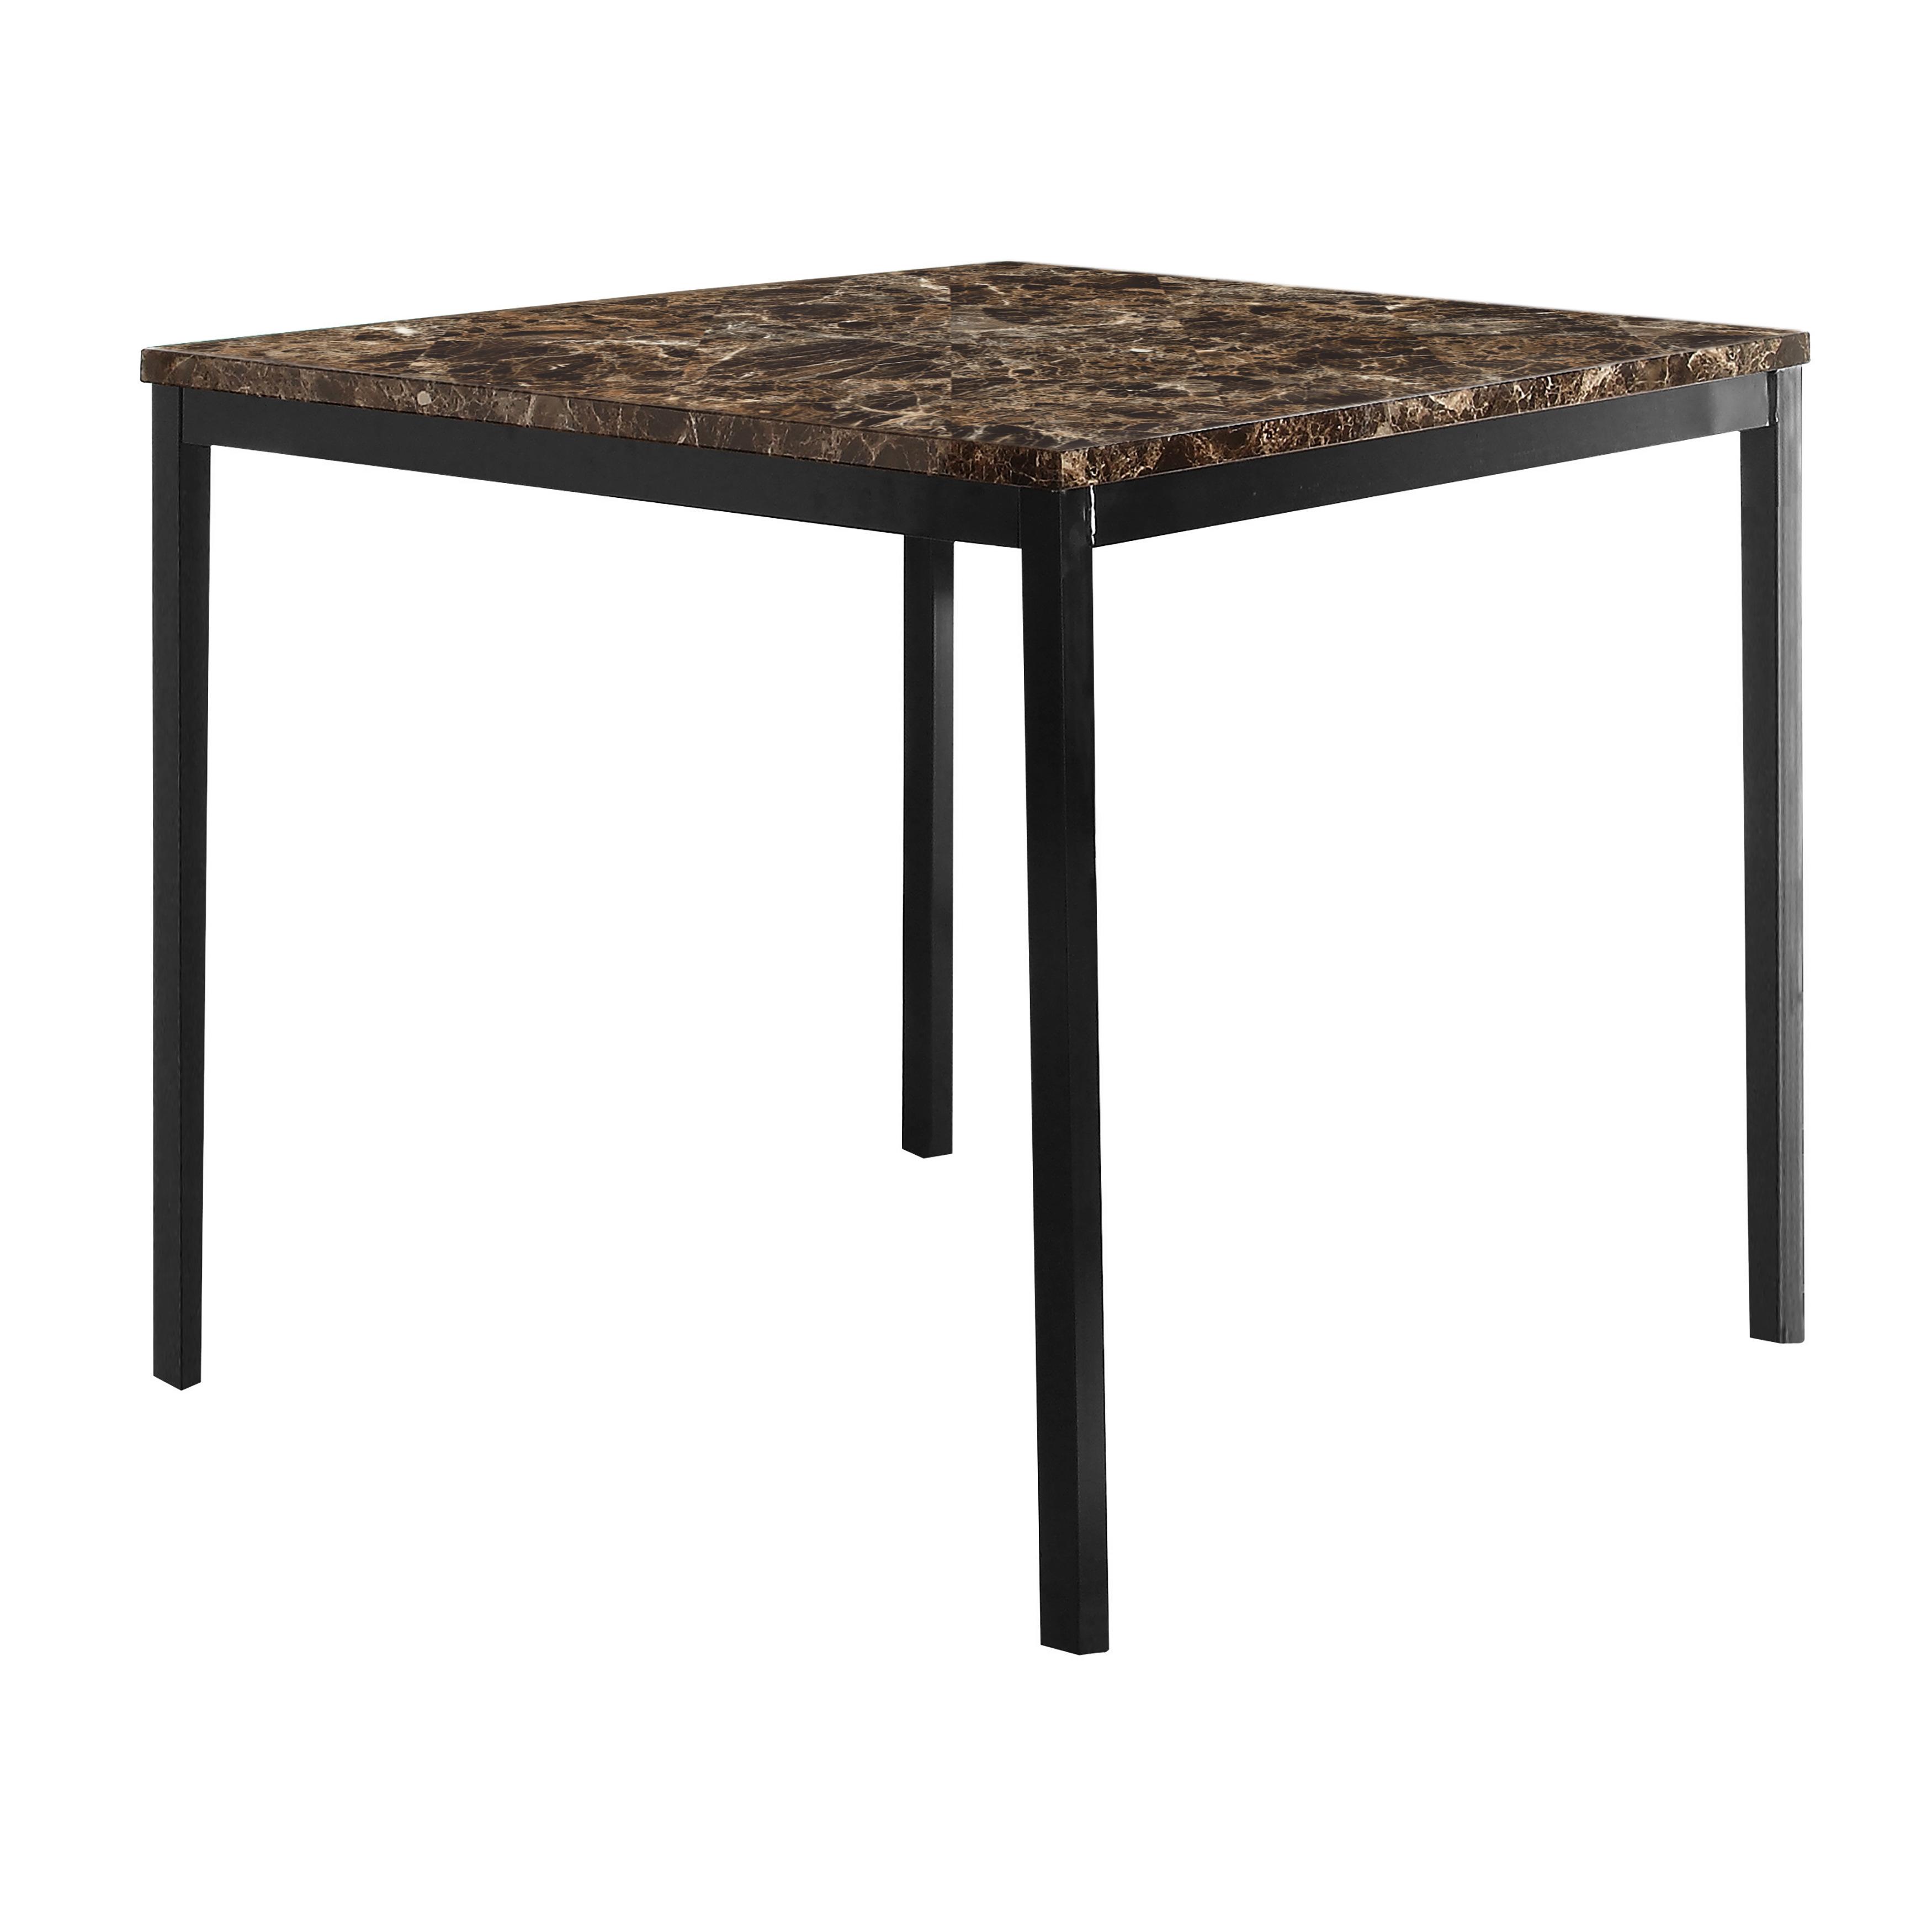 Transitional Counter Height Table 2601-36 Tempe 2601-36 in Brown 